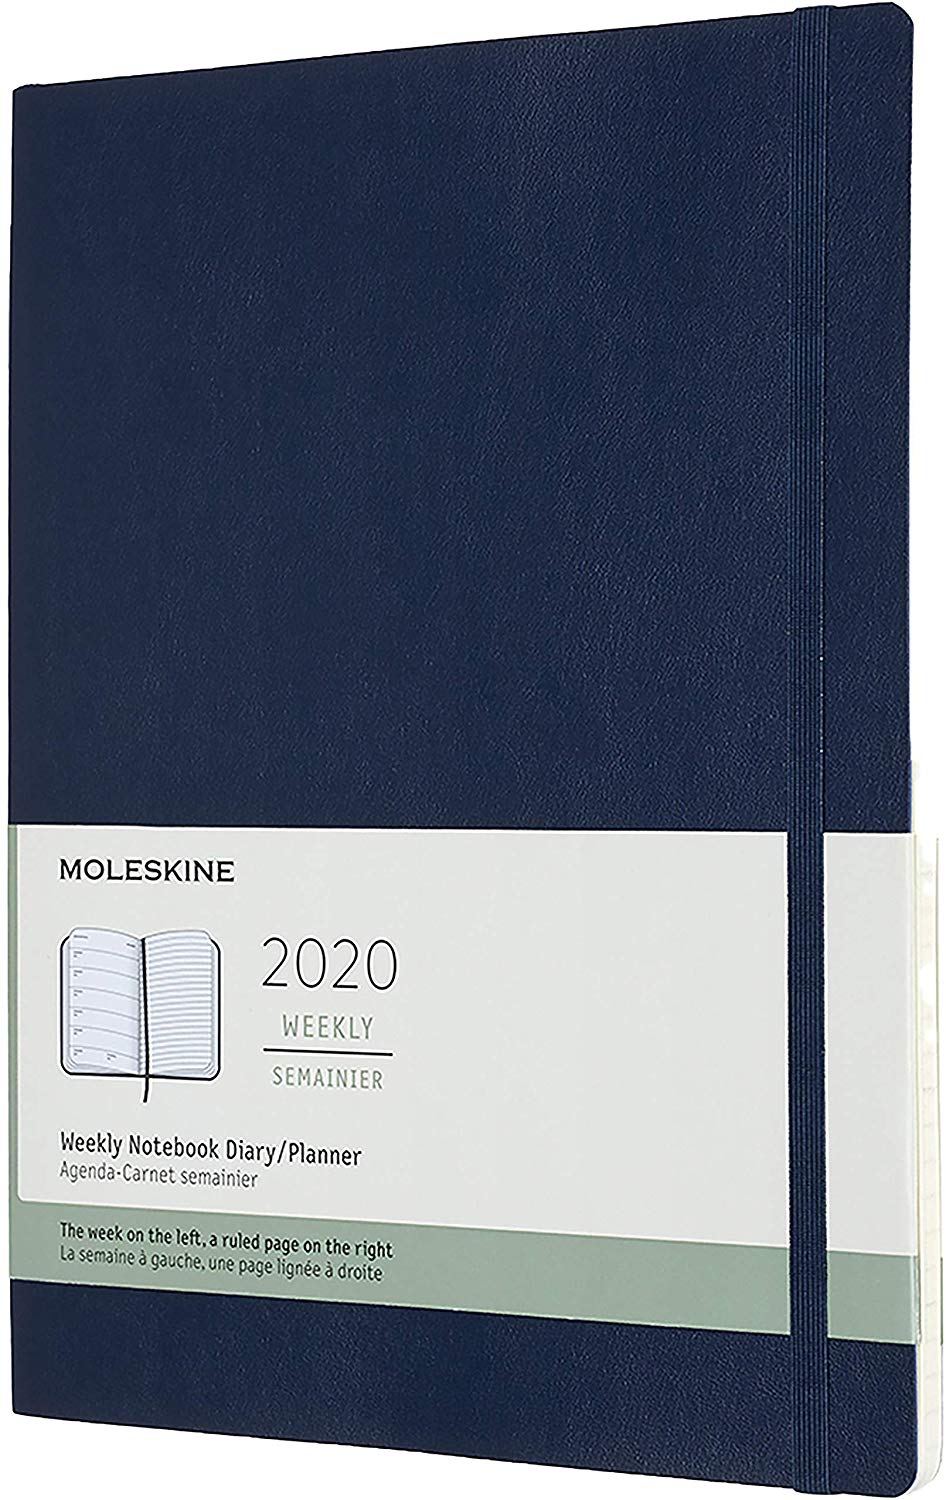 Agenda 2020 - Moleskine 12-Month Weekly Notebook Planner - Sapphire Blue, Extra Large, Soft cover | Moleskine